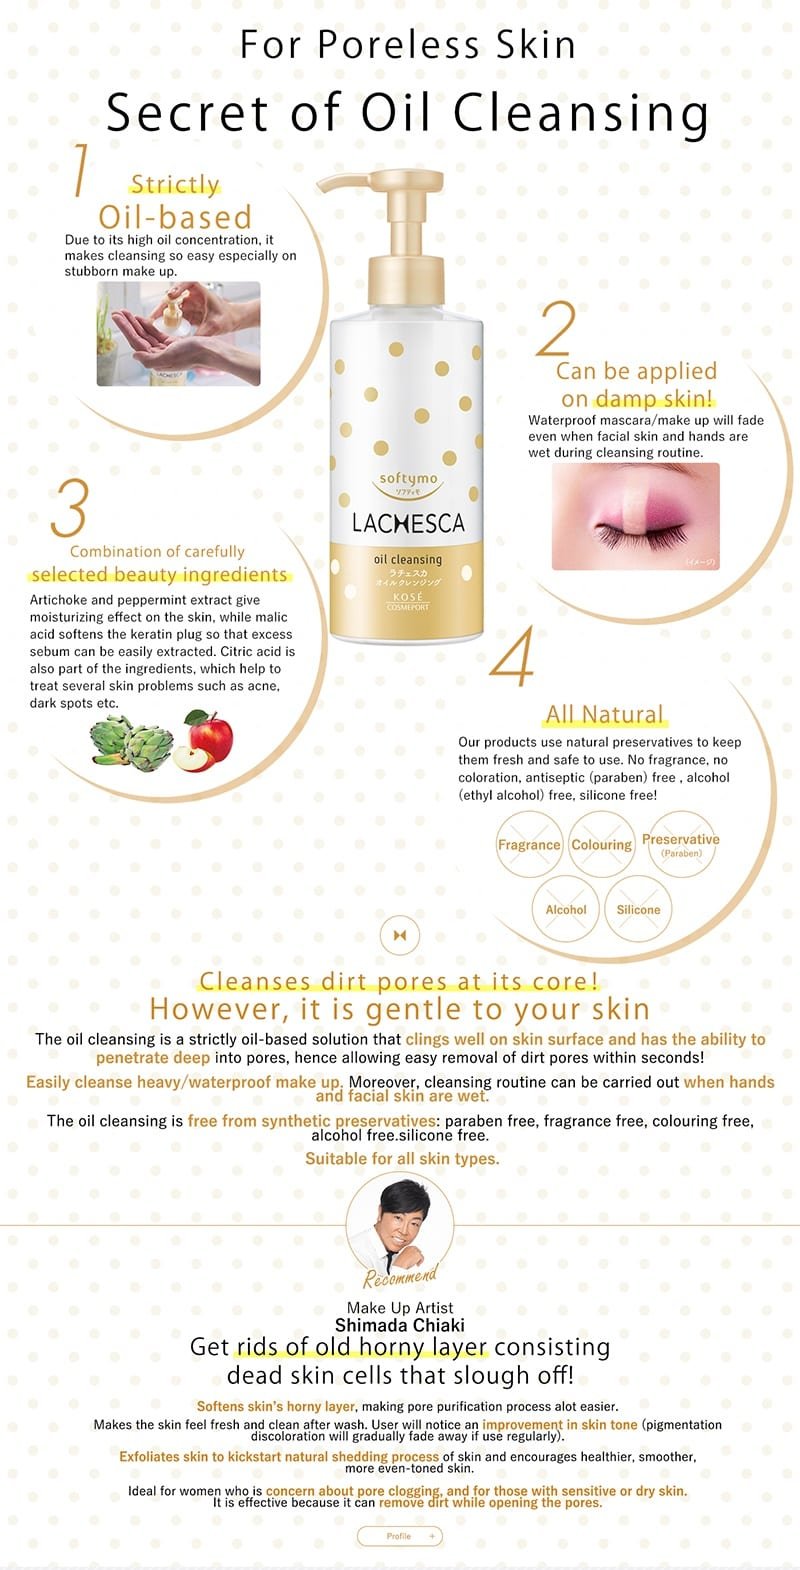 Lachesca Oil Cleansing - Info 2